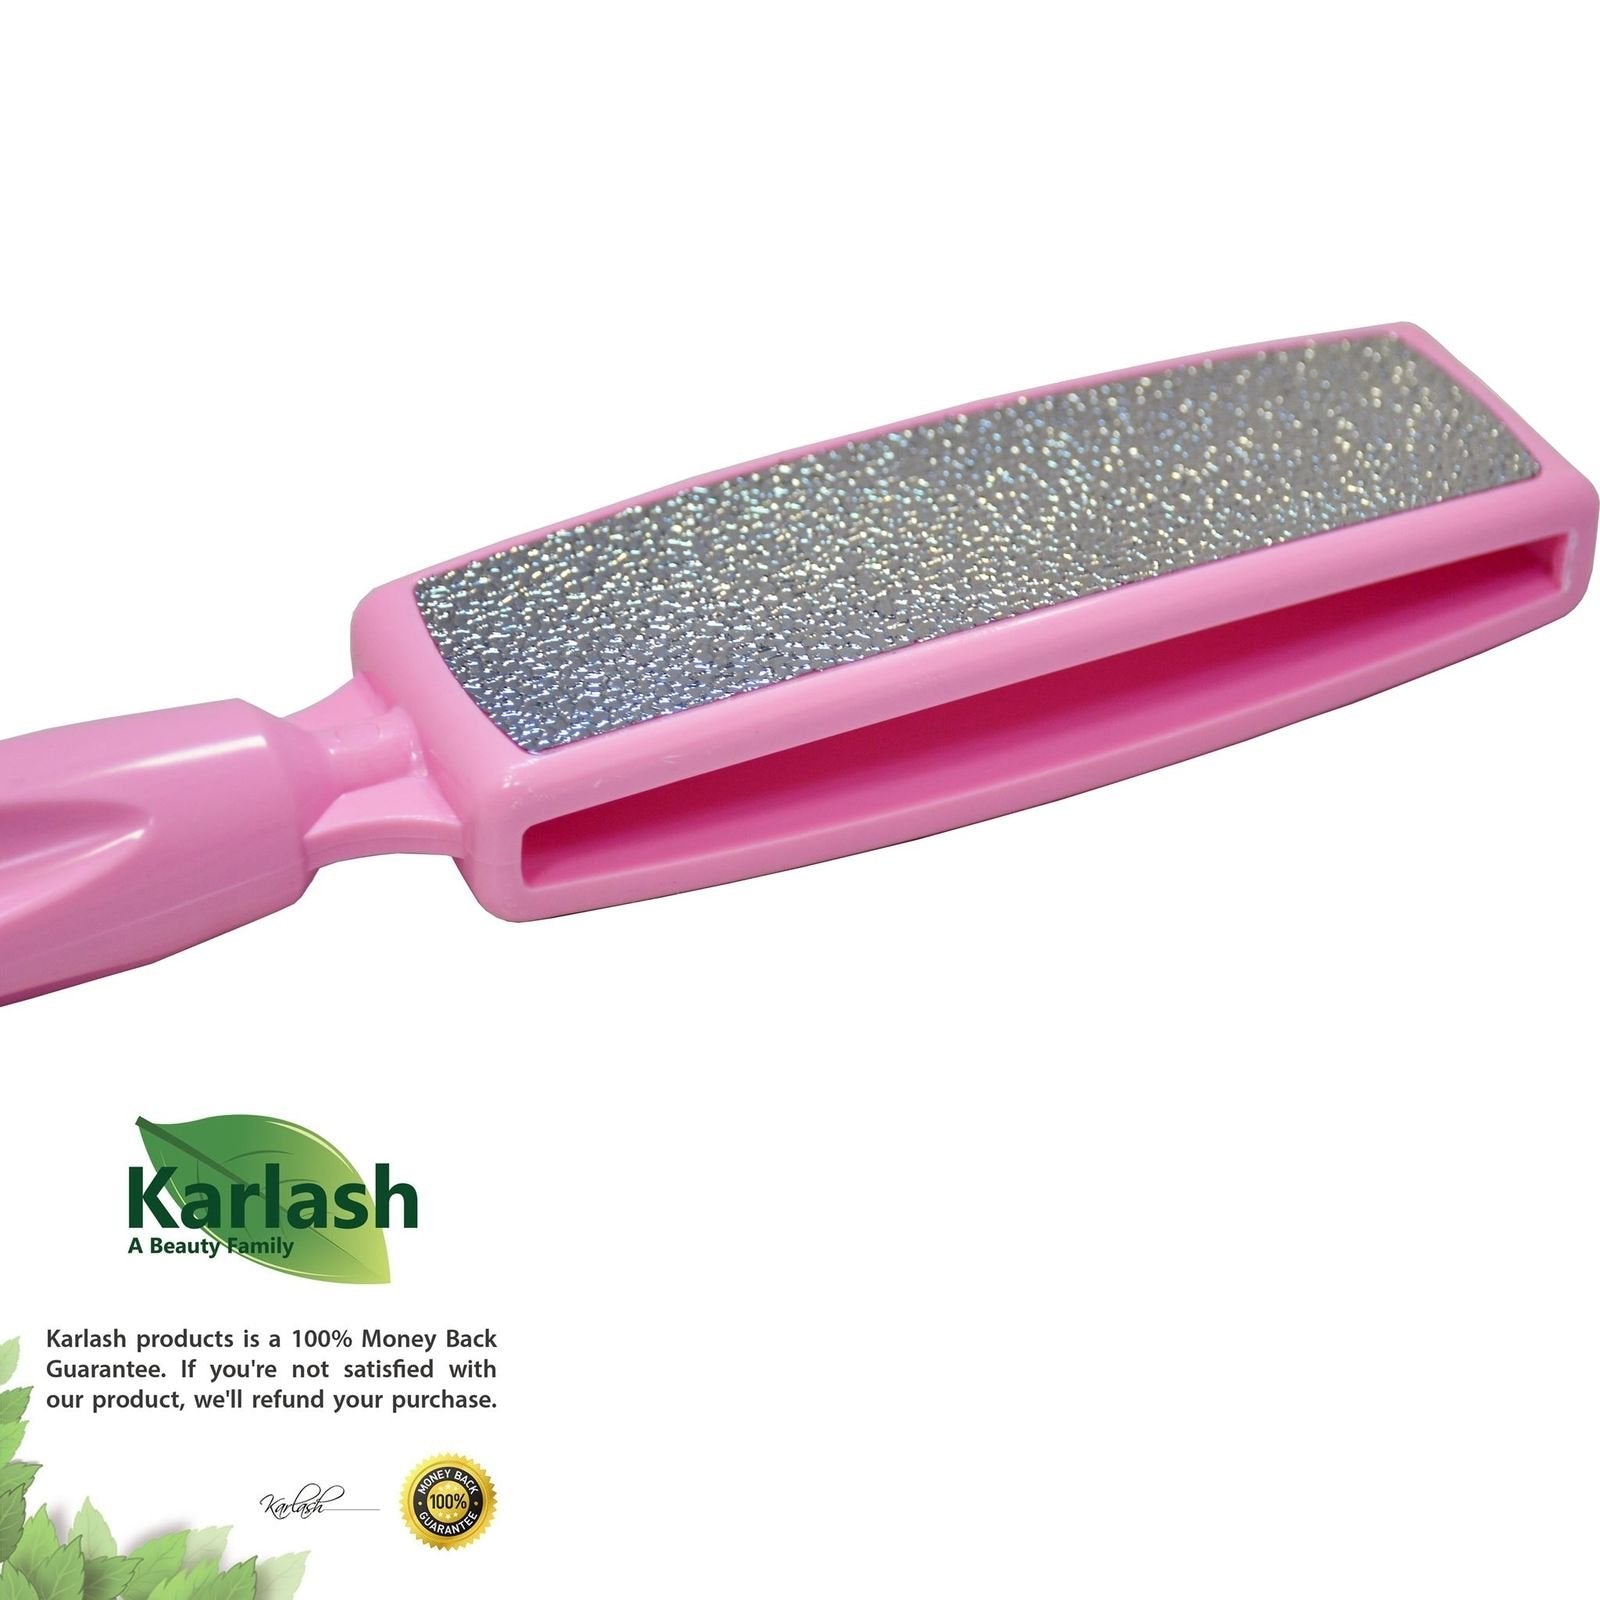 Karlash 2-Sided Hypoallergenic Nickel Foot File for Callus Trimming an